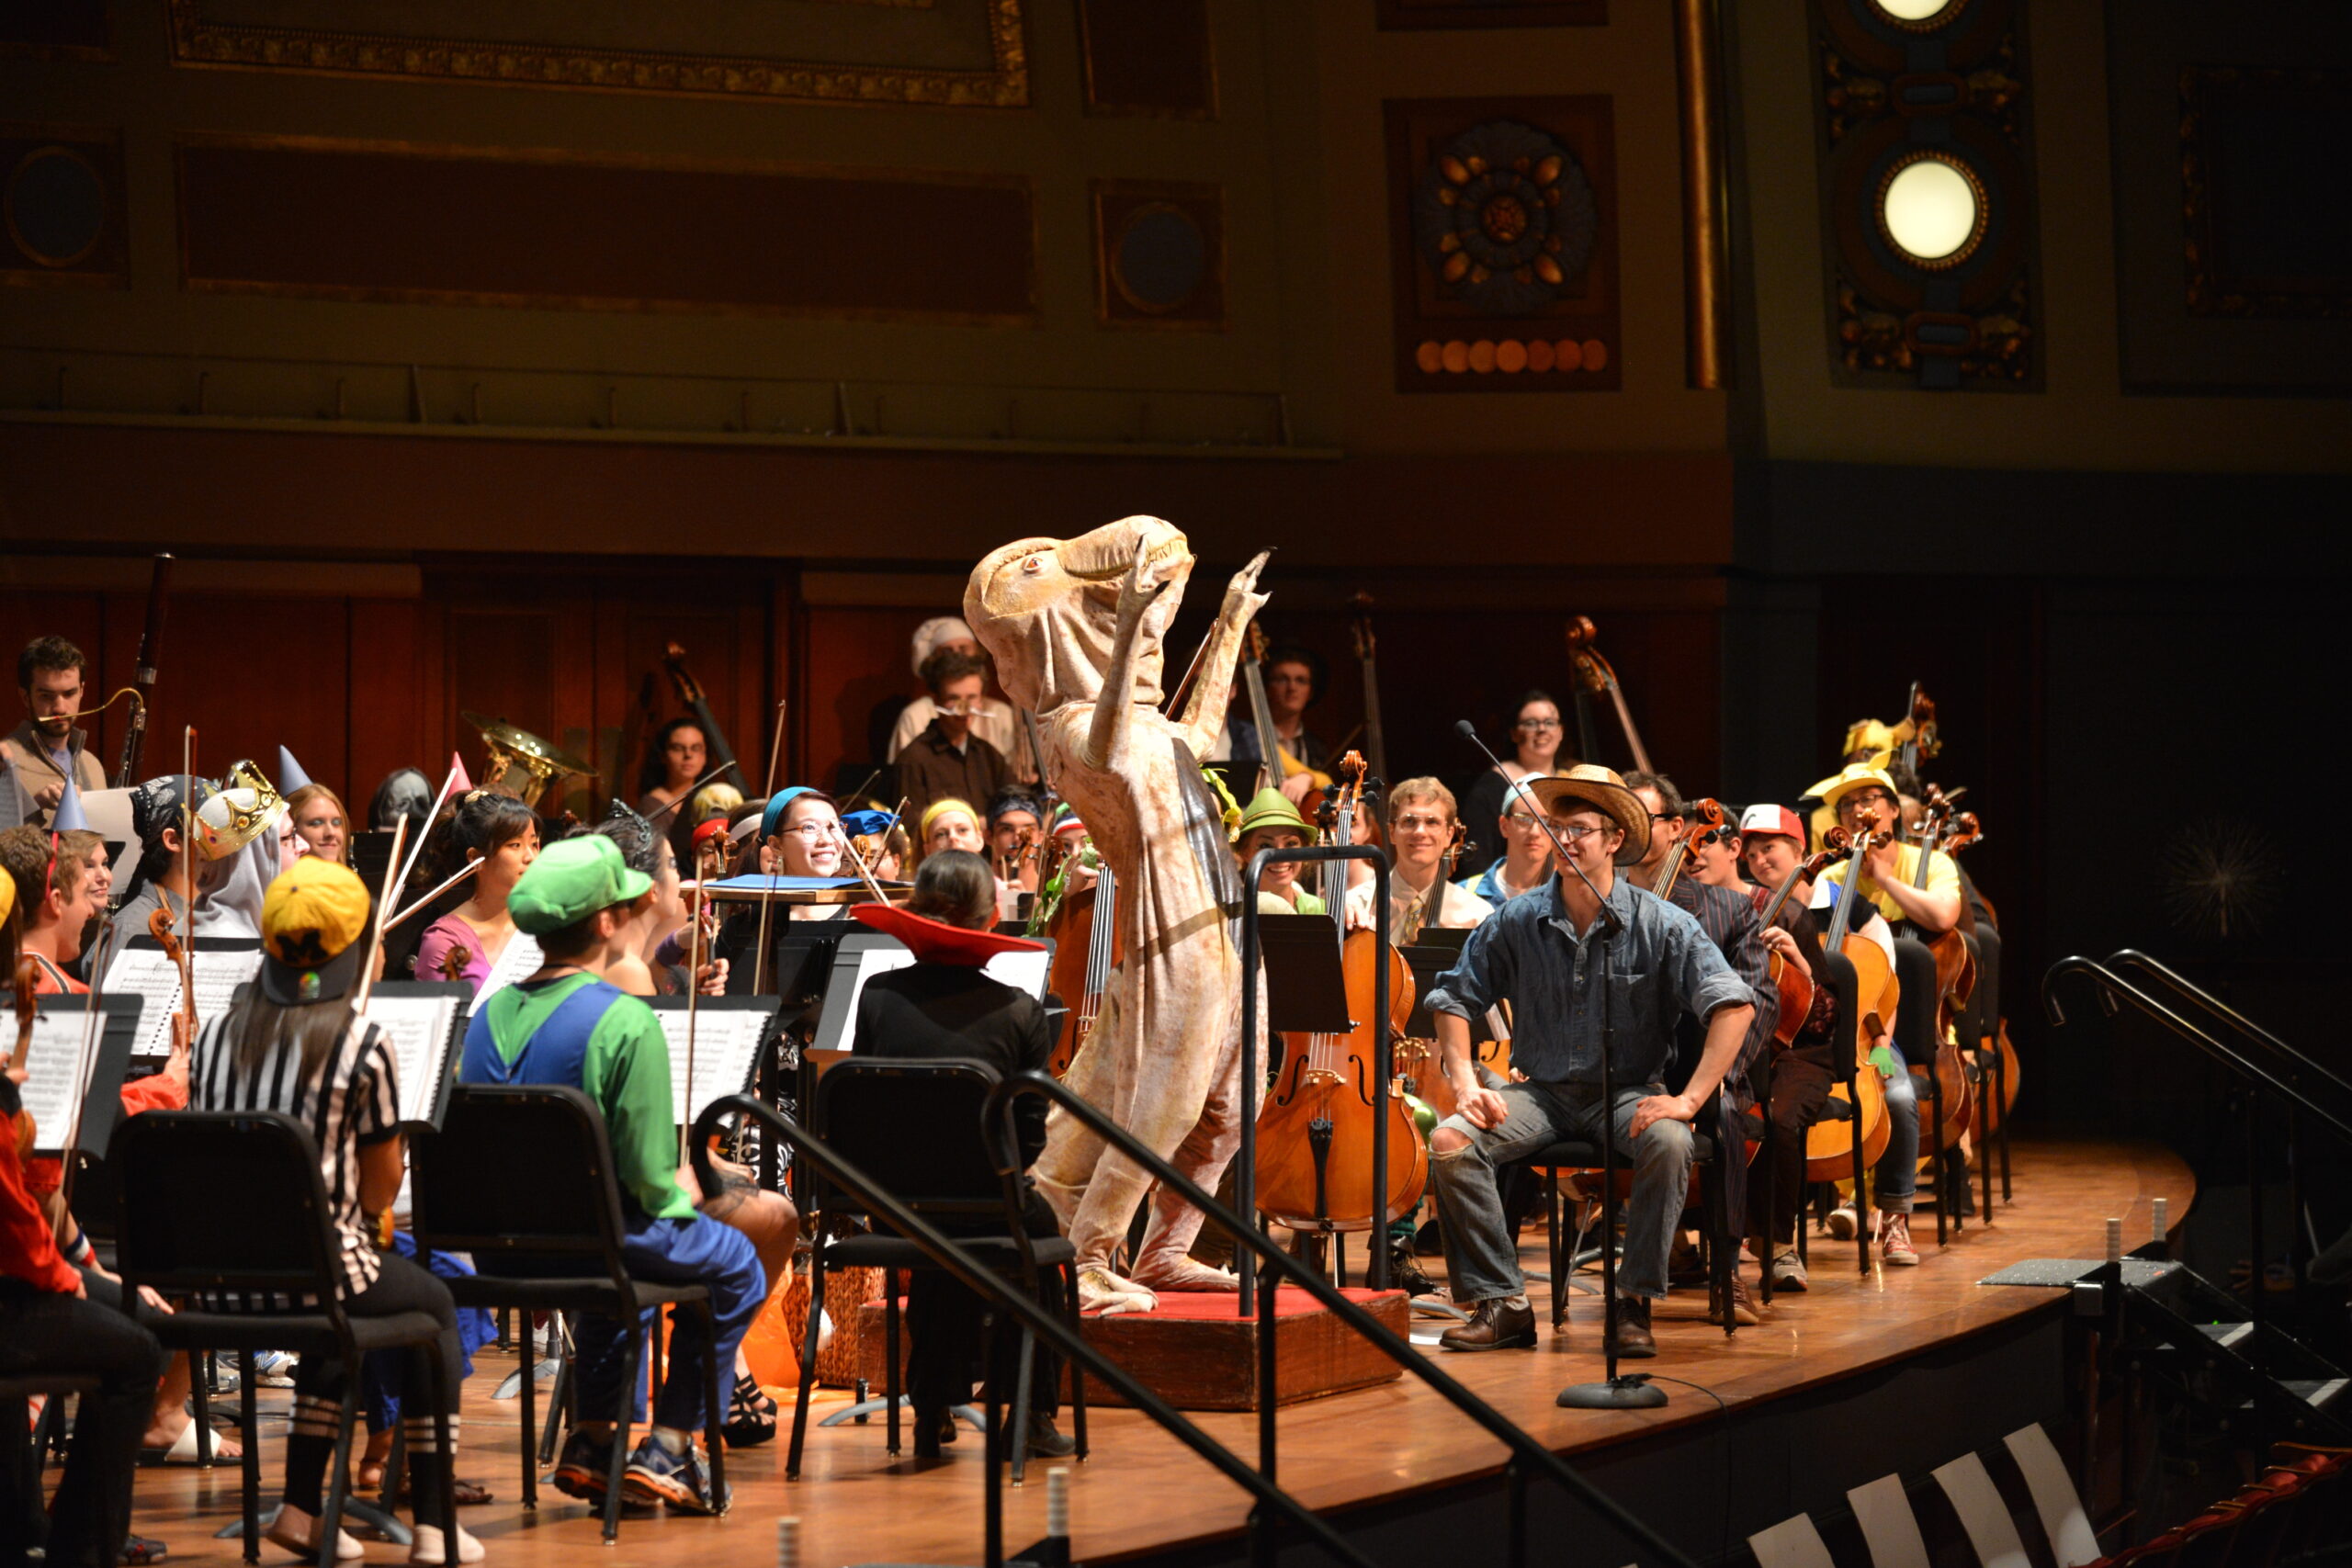 An orchestra dressed in Halloween costumes, with a T-Rex as conductor